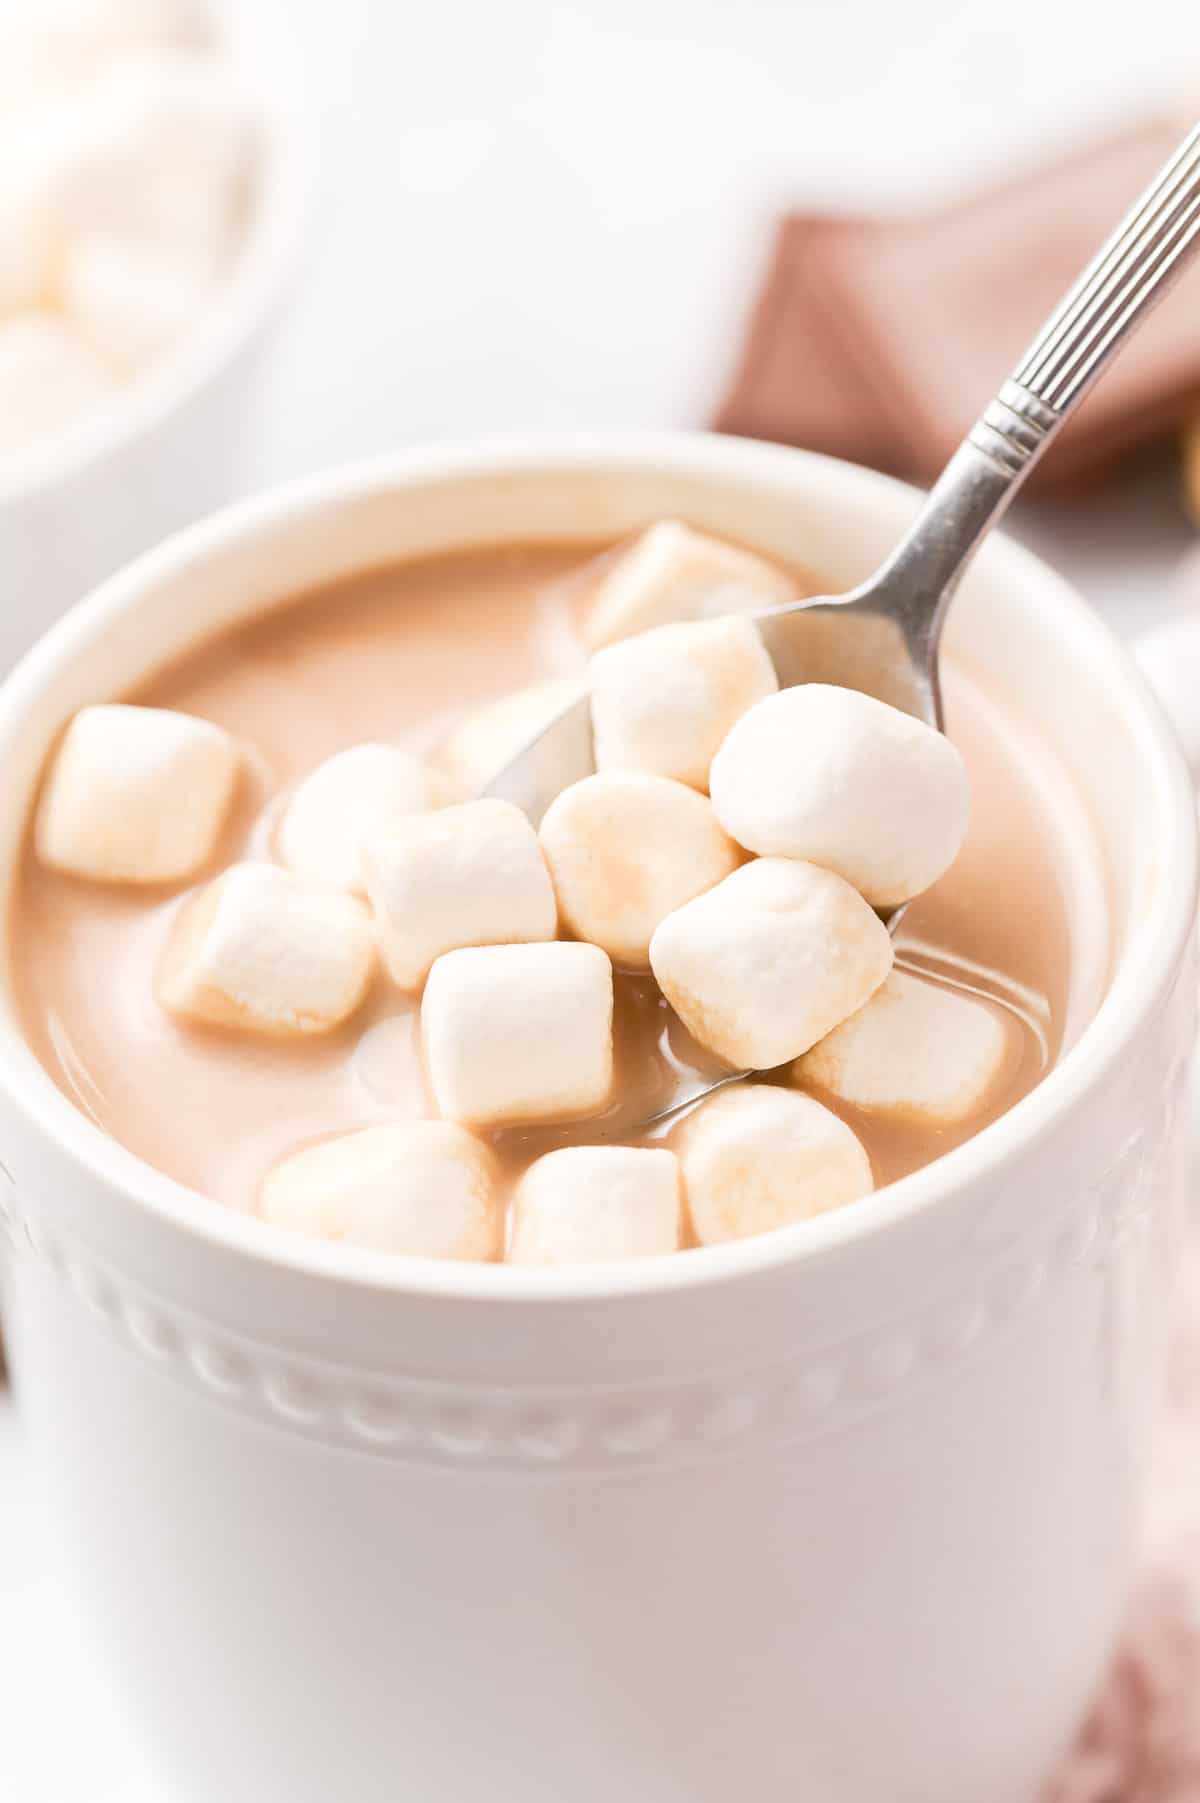 Marshmallows being added to hot cocoa with a spoon.